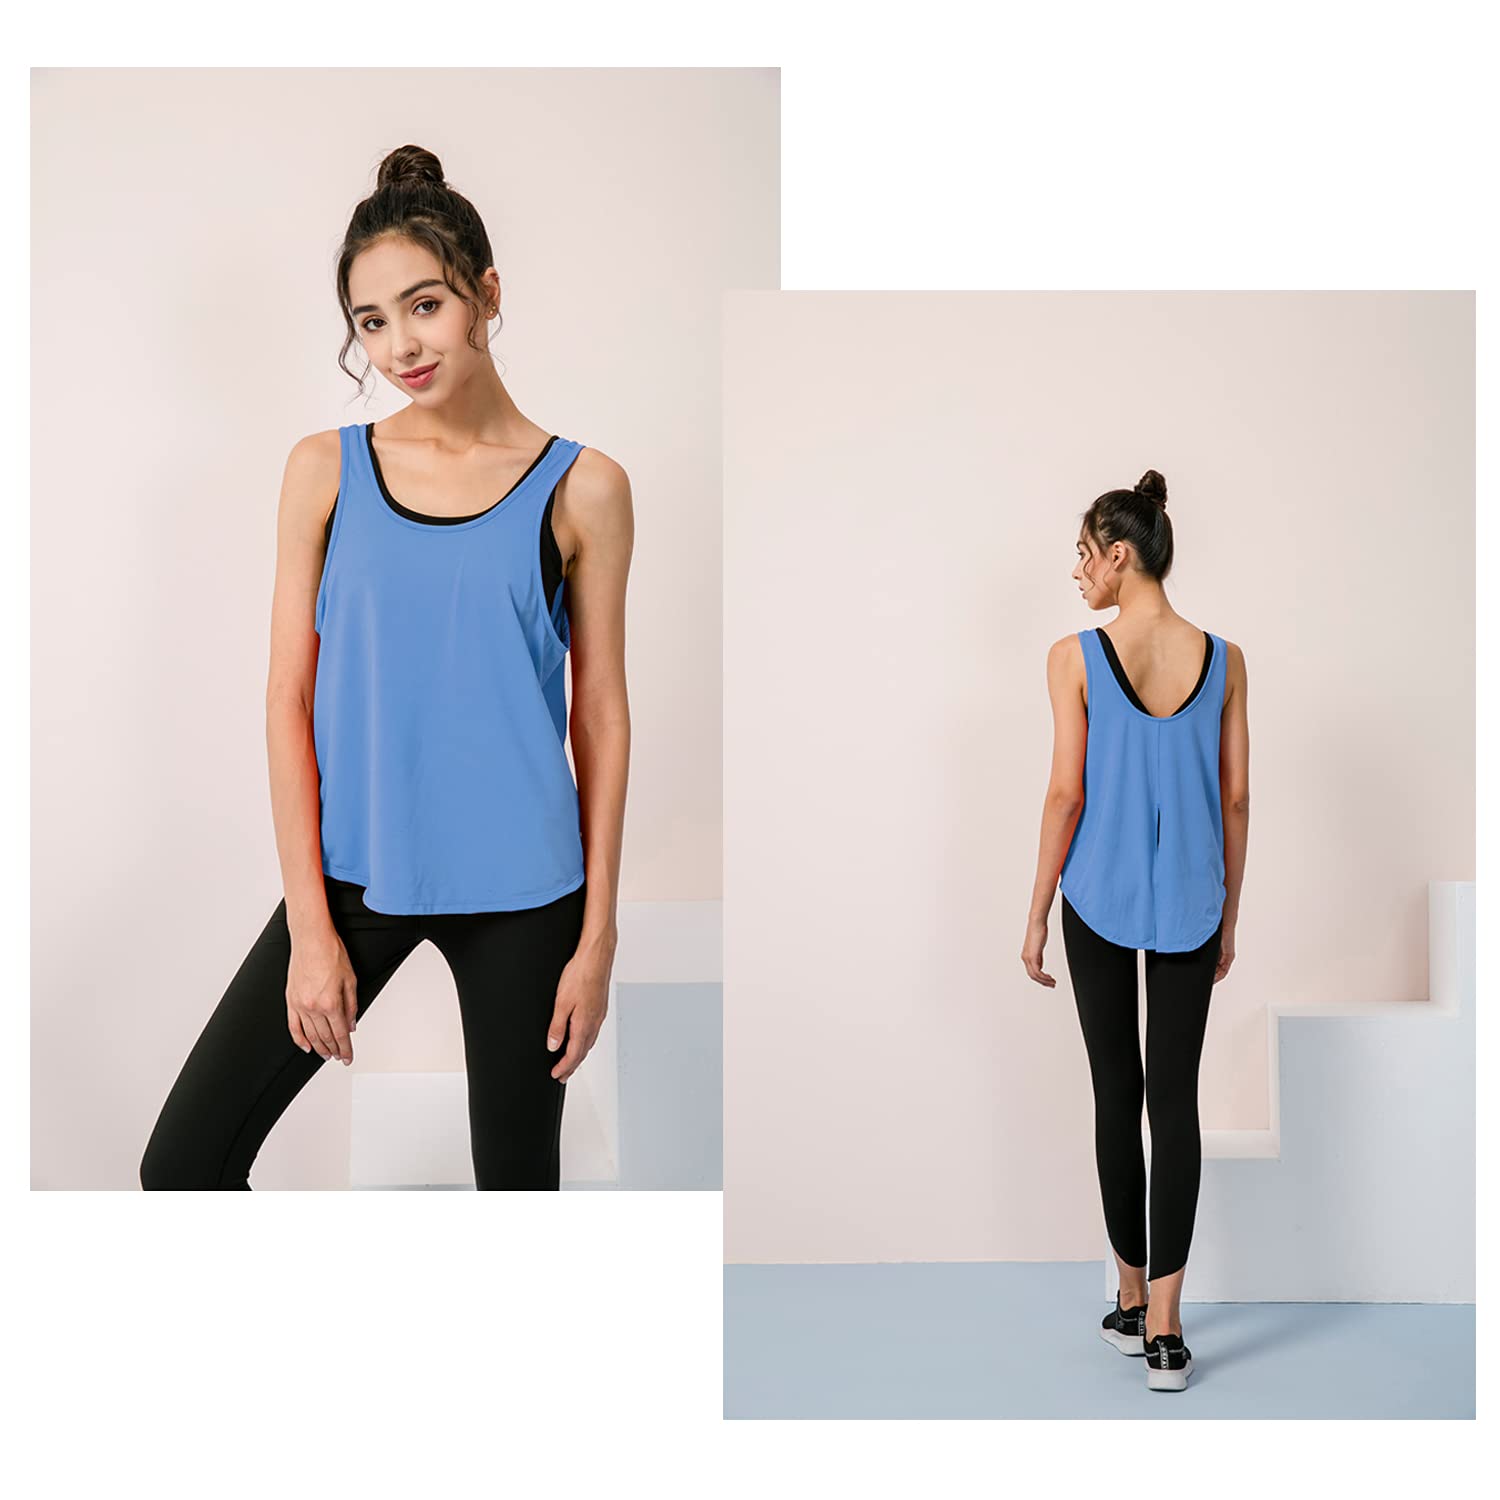 Cathalem Yoga Racerback Tank Top for Women Sleeveless Running Loose Fit Yoga  Tops Active Shirts Pickleball Sports Gym Exercise,Blue XXL 